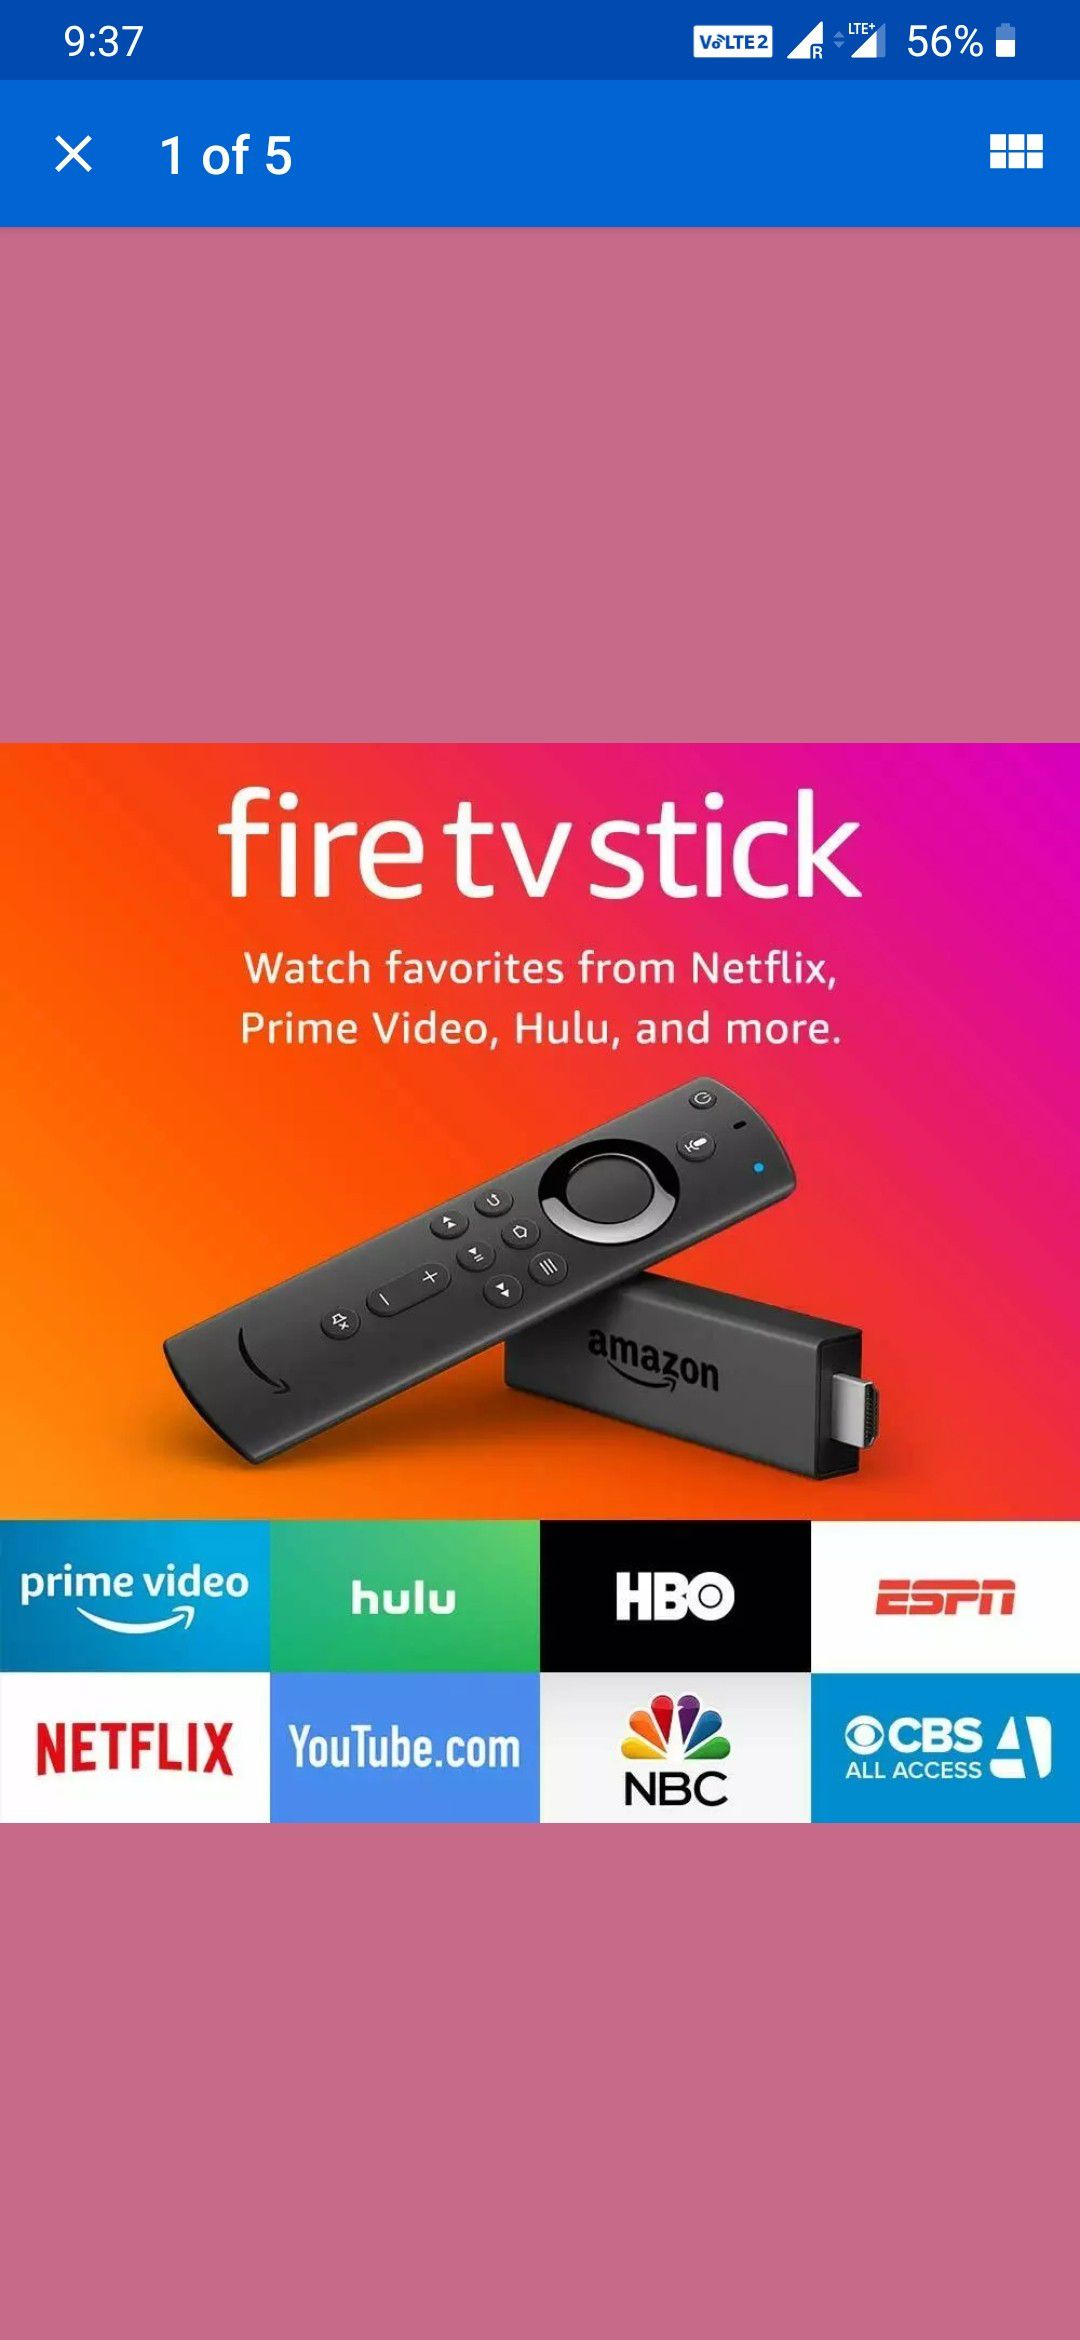 Amazon Fire TV Stick 2019 Alexa Voice Remote With $45 Sling TV credit